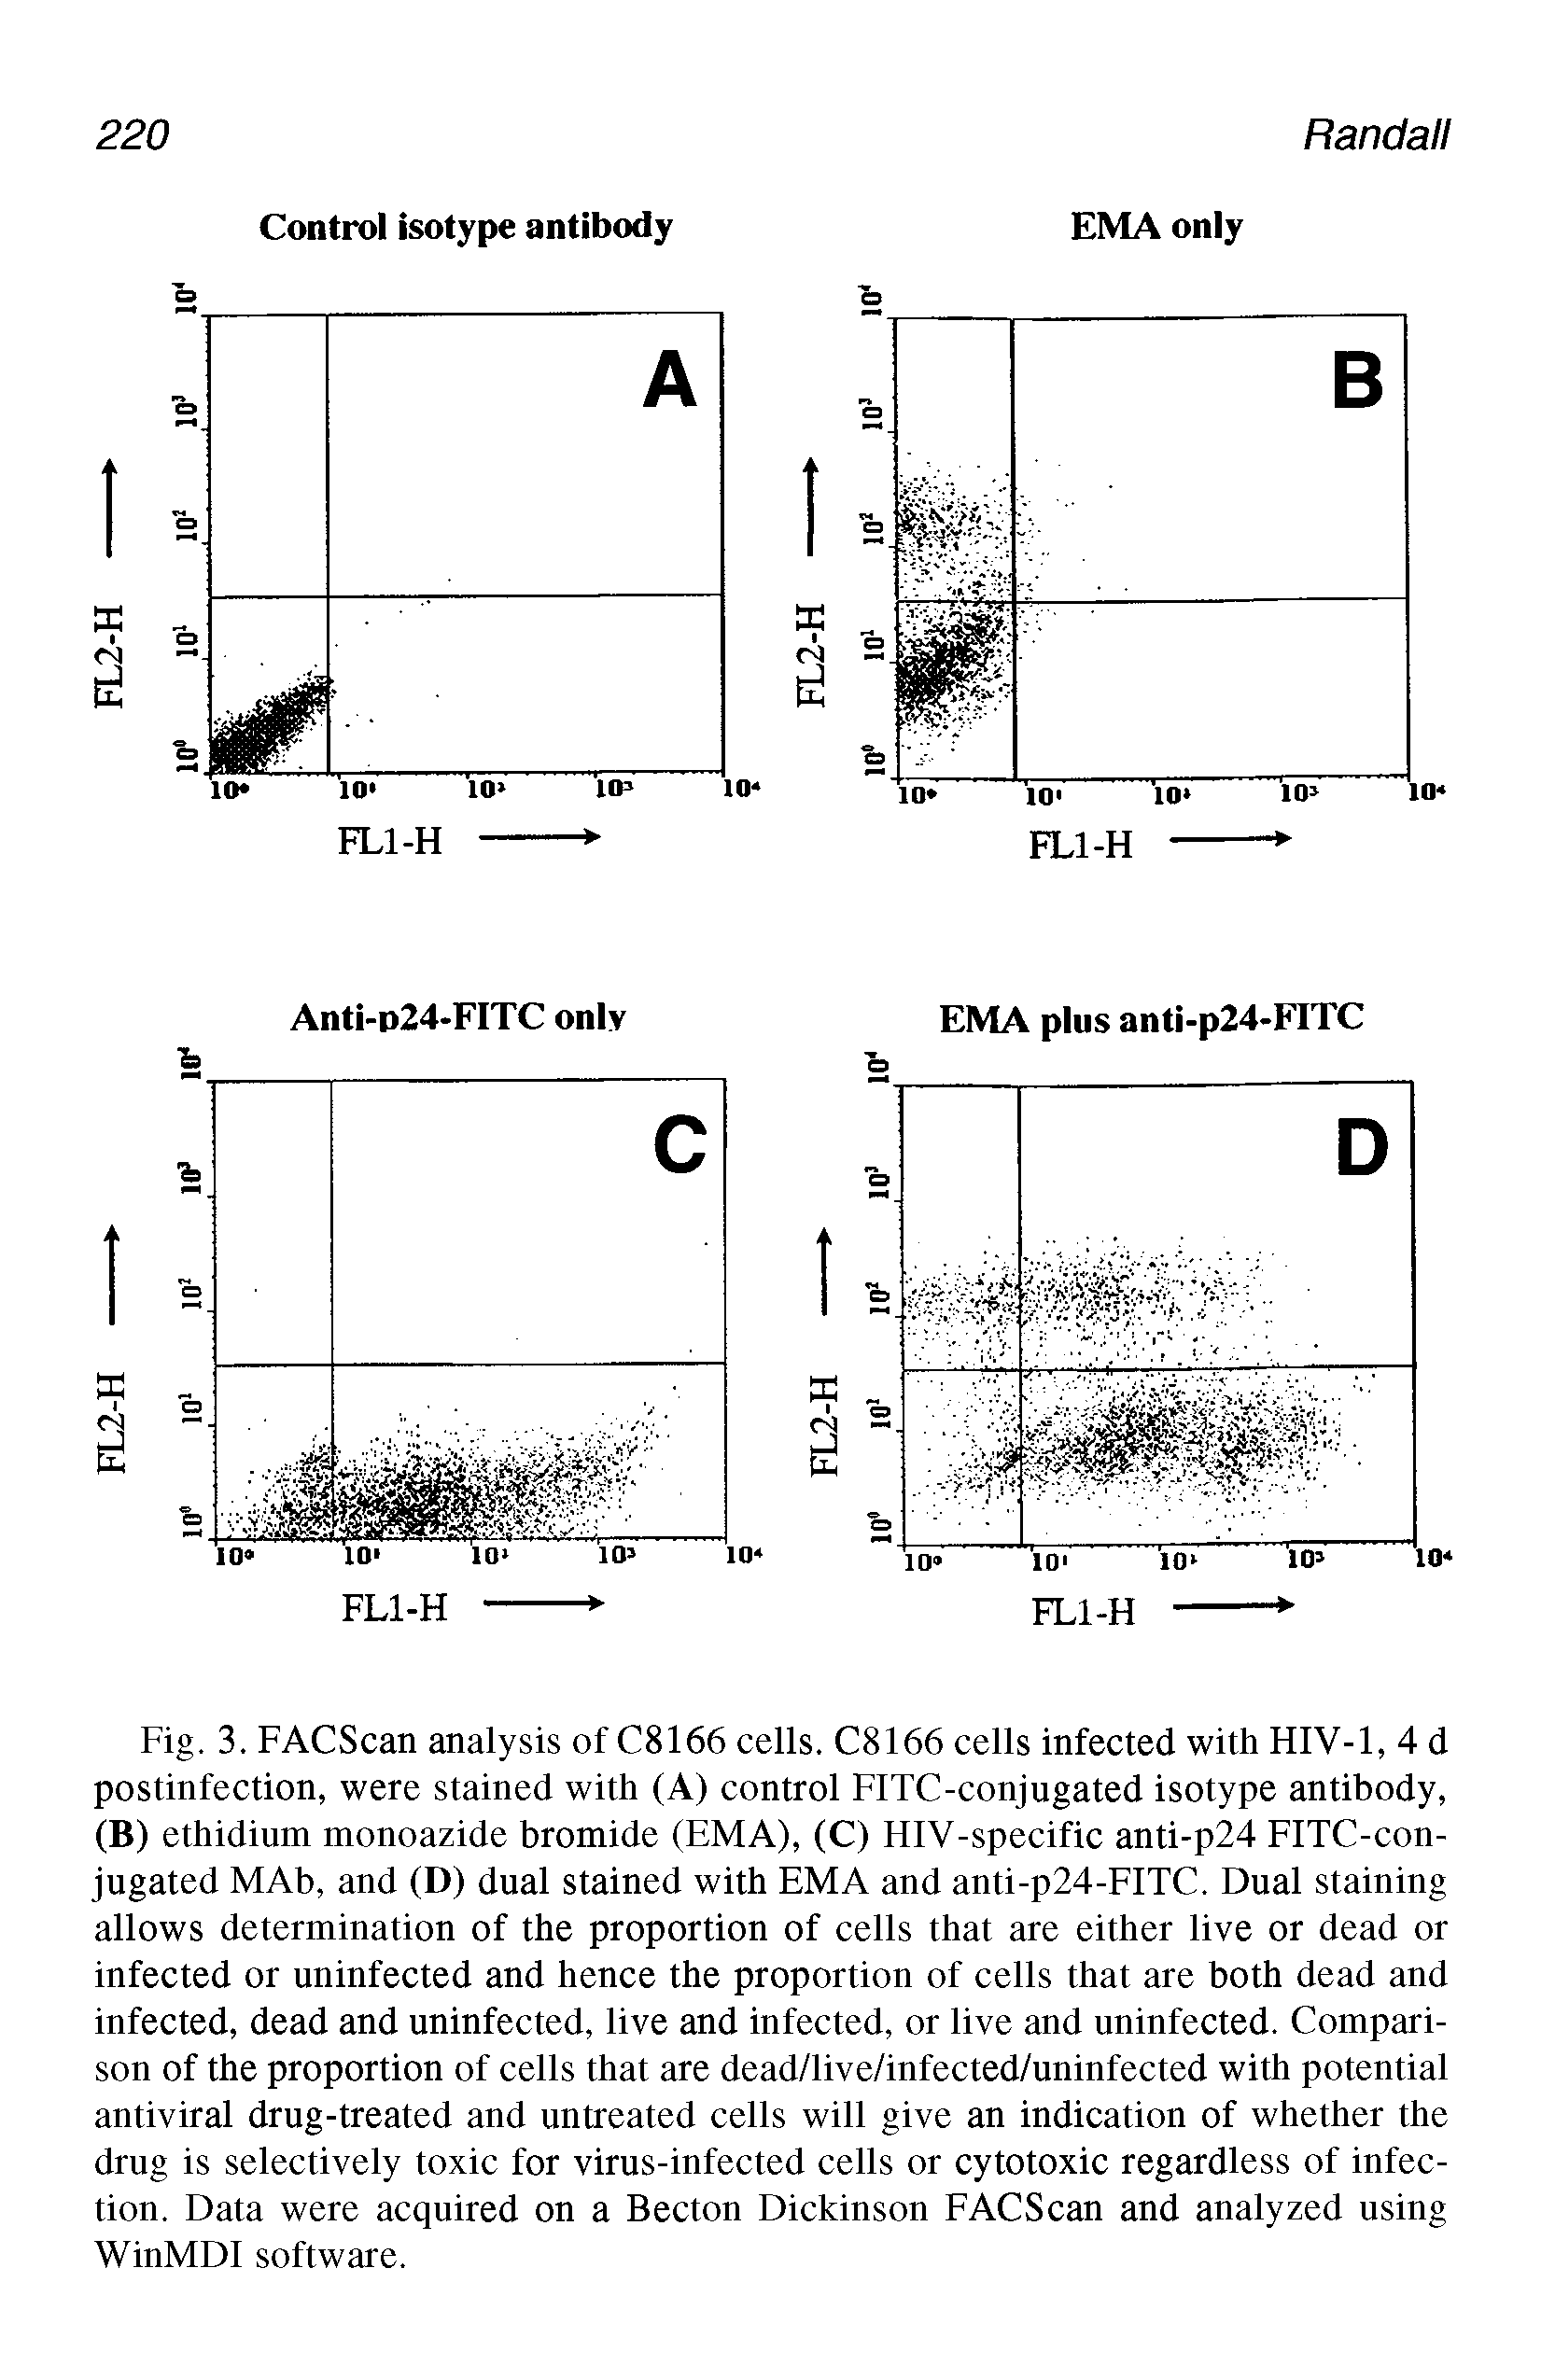 Fig. 3. FACScan analysis of C8166 cells. C8166 cells infected with HIV-1, 4 d postinfection, were stained with (A) control FITC-conjugated isotype antibody, (B) ethidium monoazide bromide (EMA), (C) HIV-specific anti-p24 FITC-con-jugated MAb, and (D) dual stained with EMA and anti-p24-FITC. Dual staining allows determination of the proportion of cells that are either live or dead or infected or uninfected and hence the proportion of cells that are both dead and infected, dead and uninfected, live and infected, or live and uninfected. Comparison of the proportion of cells that are dead/live/infected/uninfected with potential antiviral drug-treated and untreated cells will give an indication of whether the drug is selectively toxic for virus-infected cells or cytotoxic regardless of infection. Data were acquired on a Becton Dickinson FACScan and analyzed using WinMDI software.